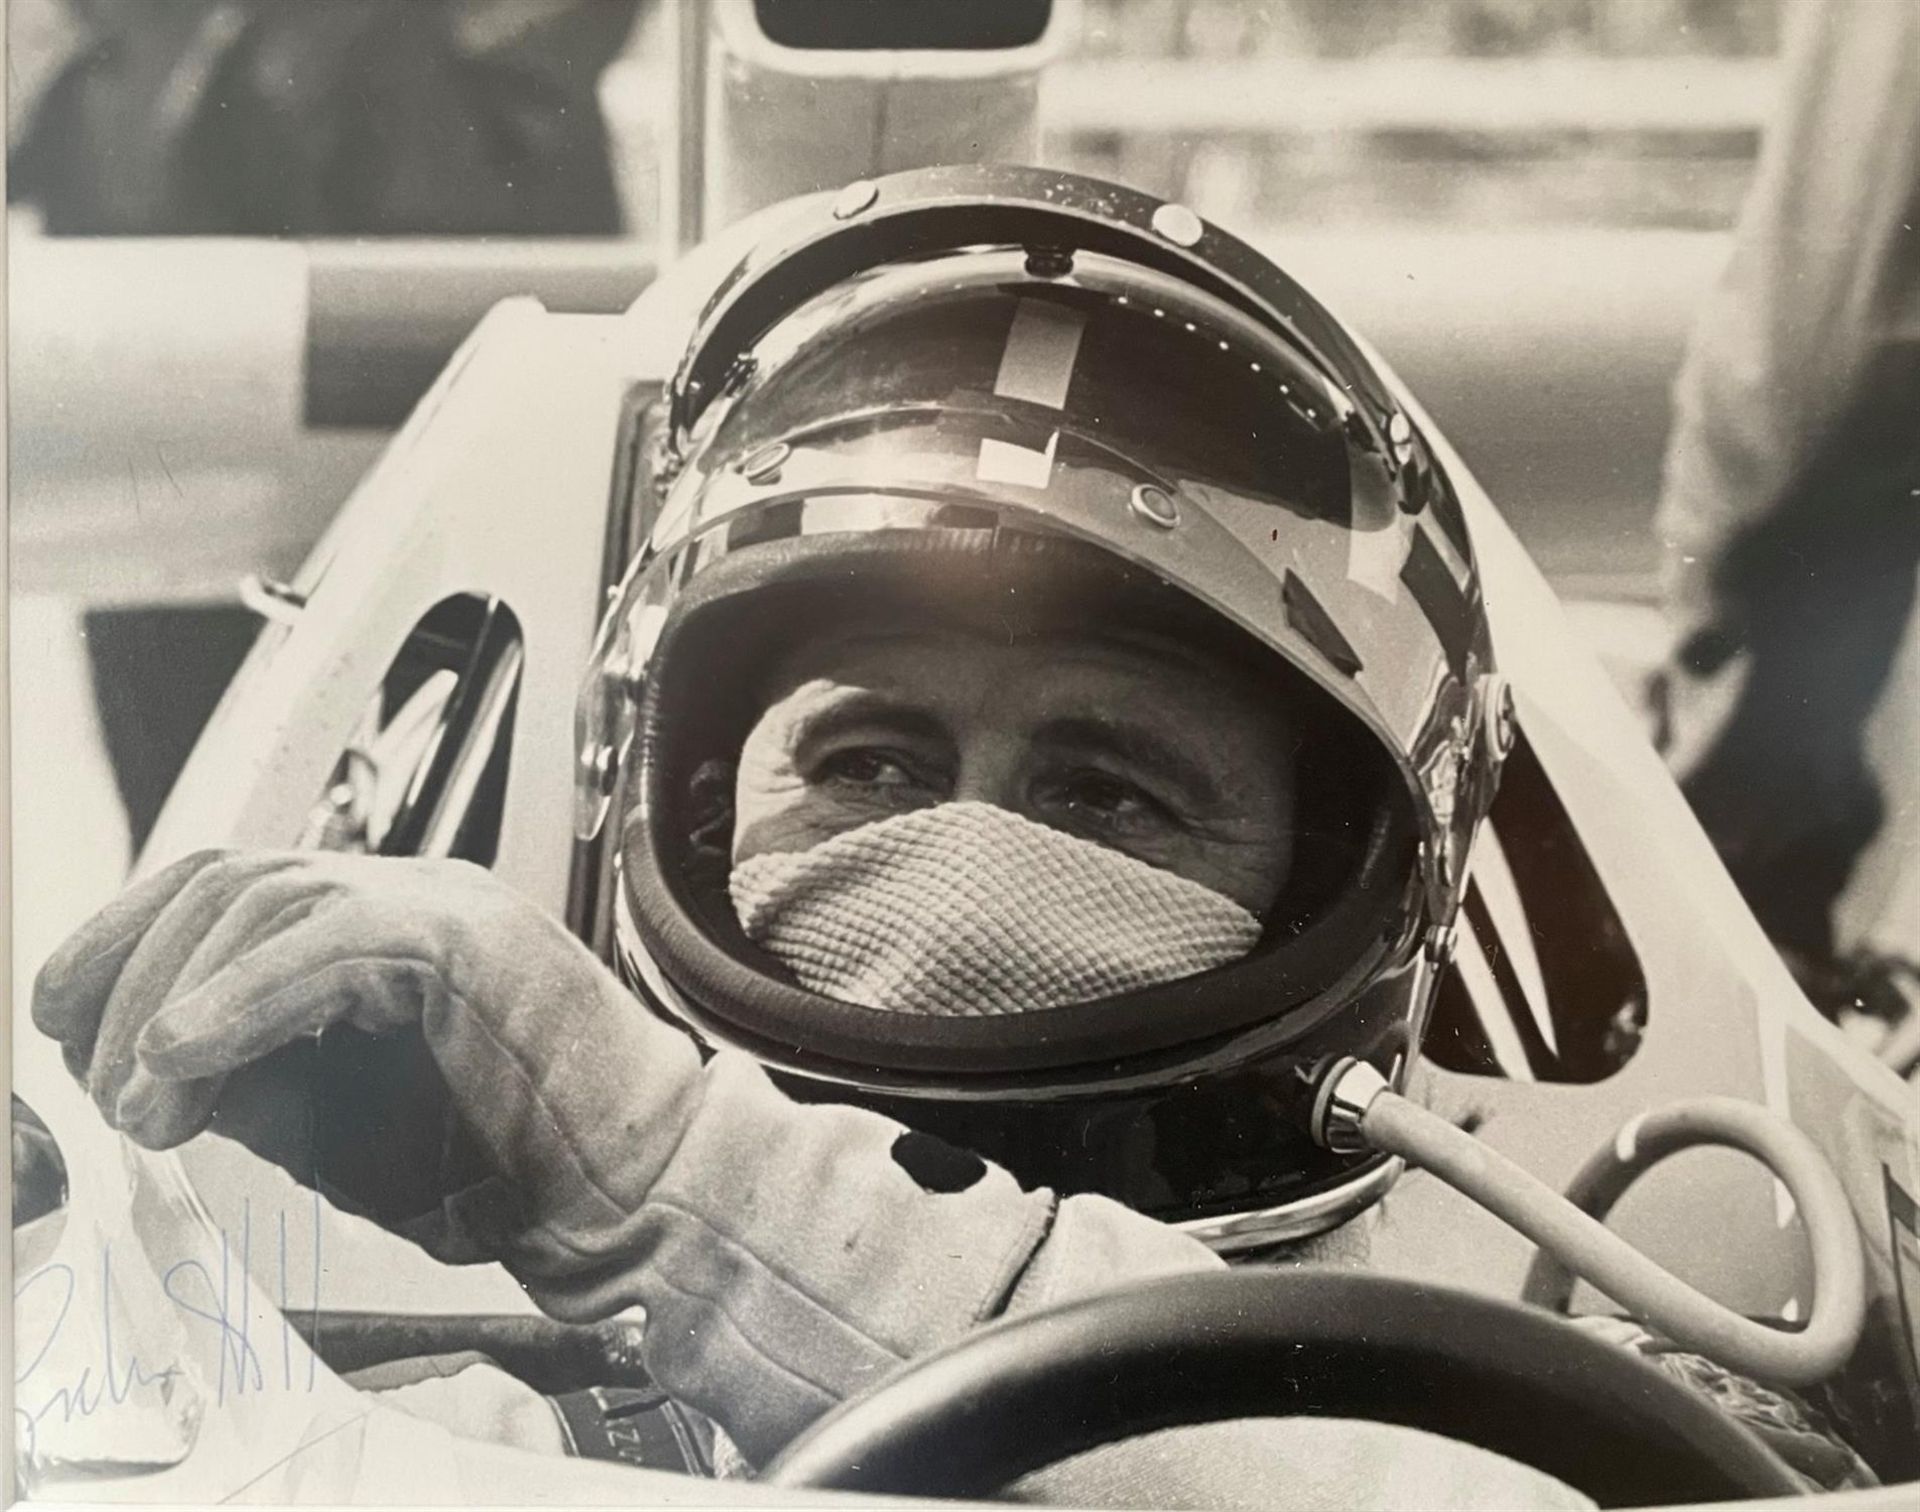 Four Original Photographic Prints of Graham Hill from the 1974 British Grand Prix* - Image 4 of 10